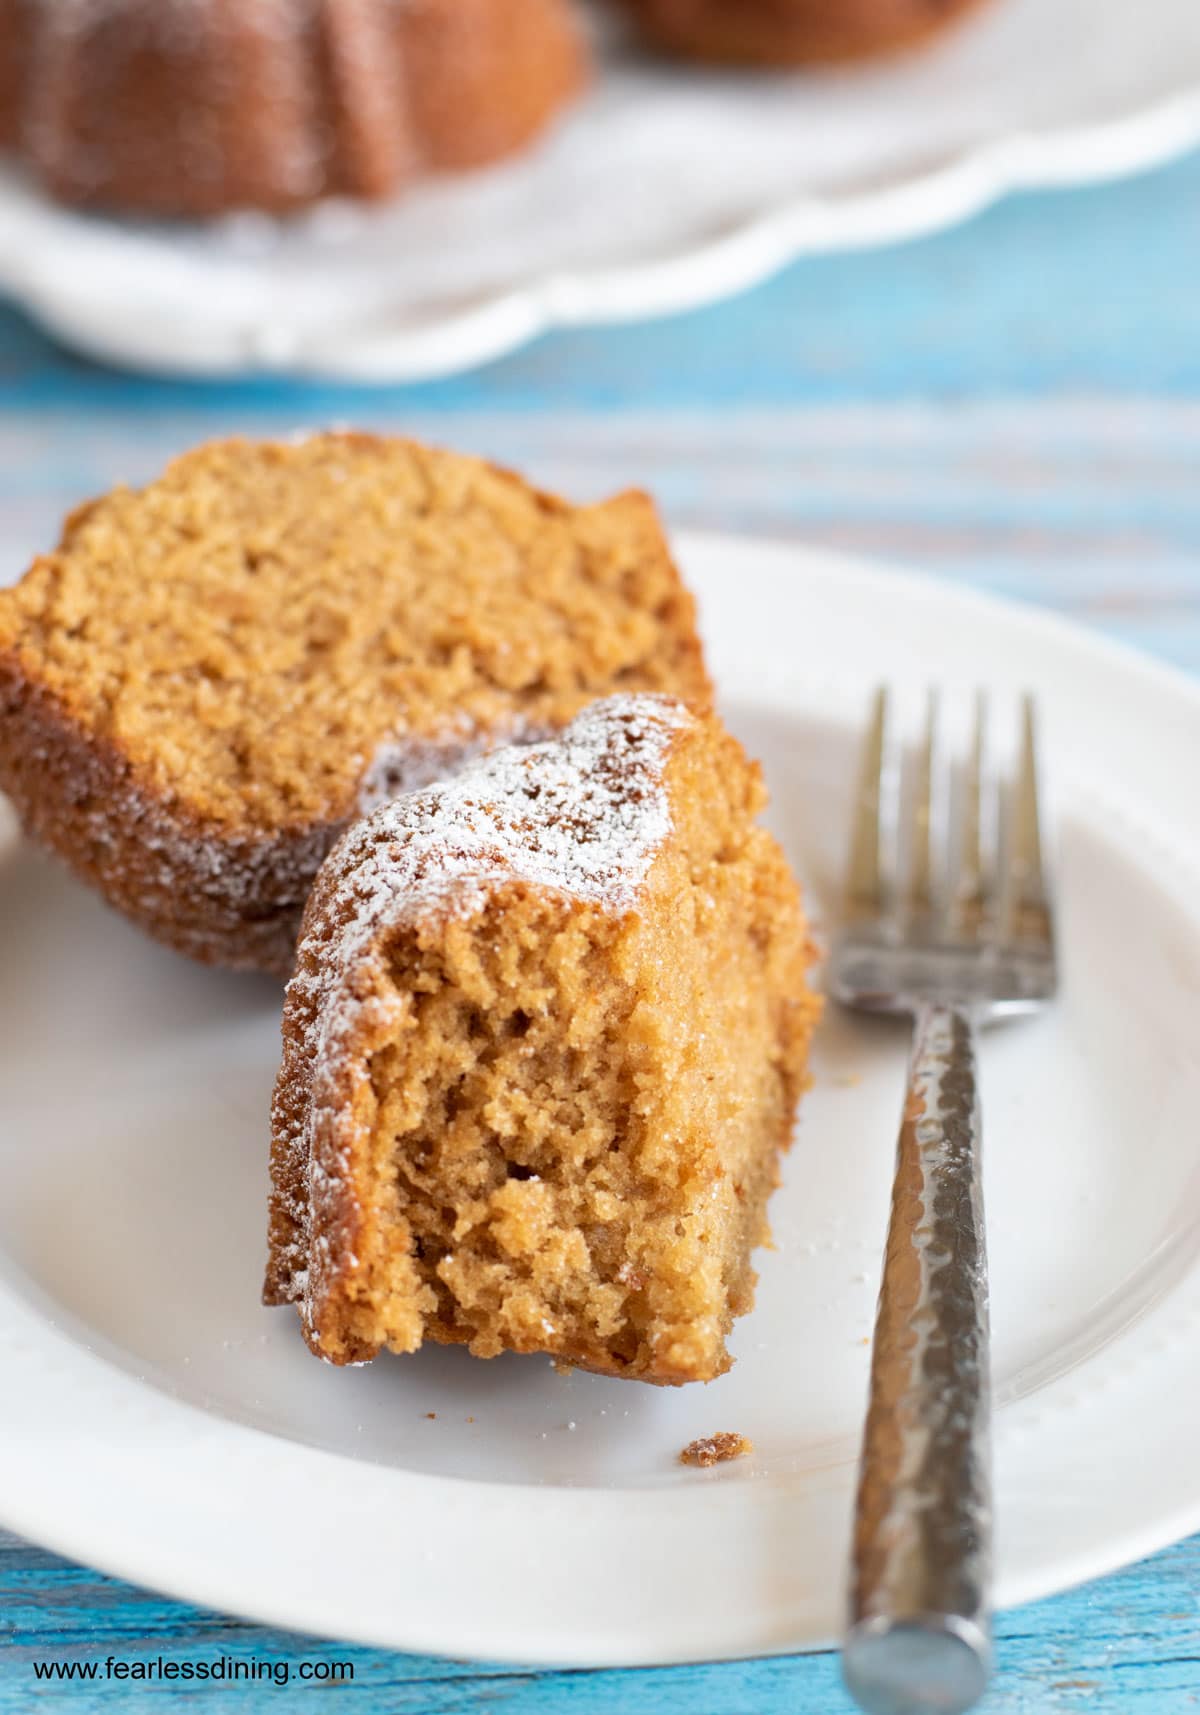 A slice of gluten free honey cake on a plate.